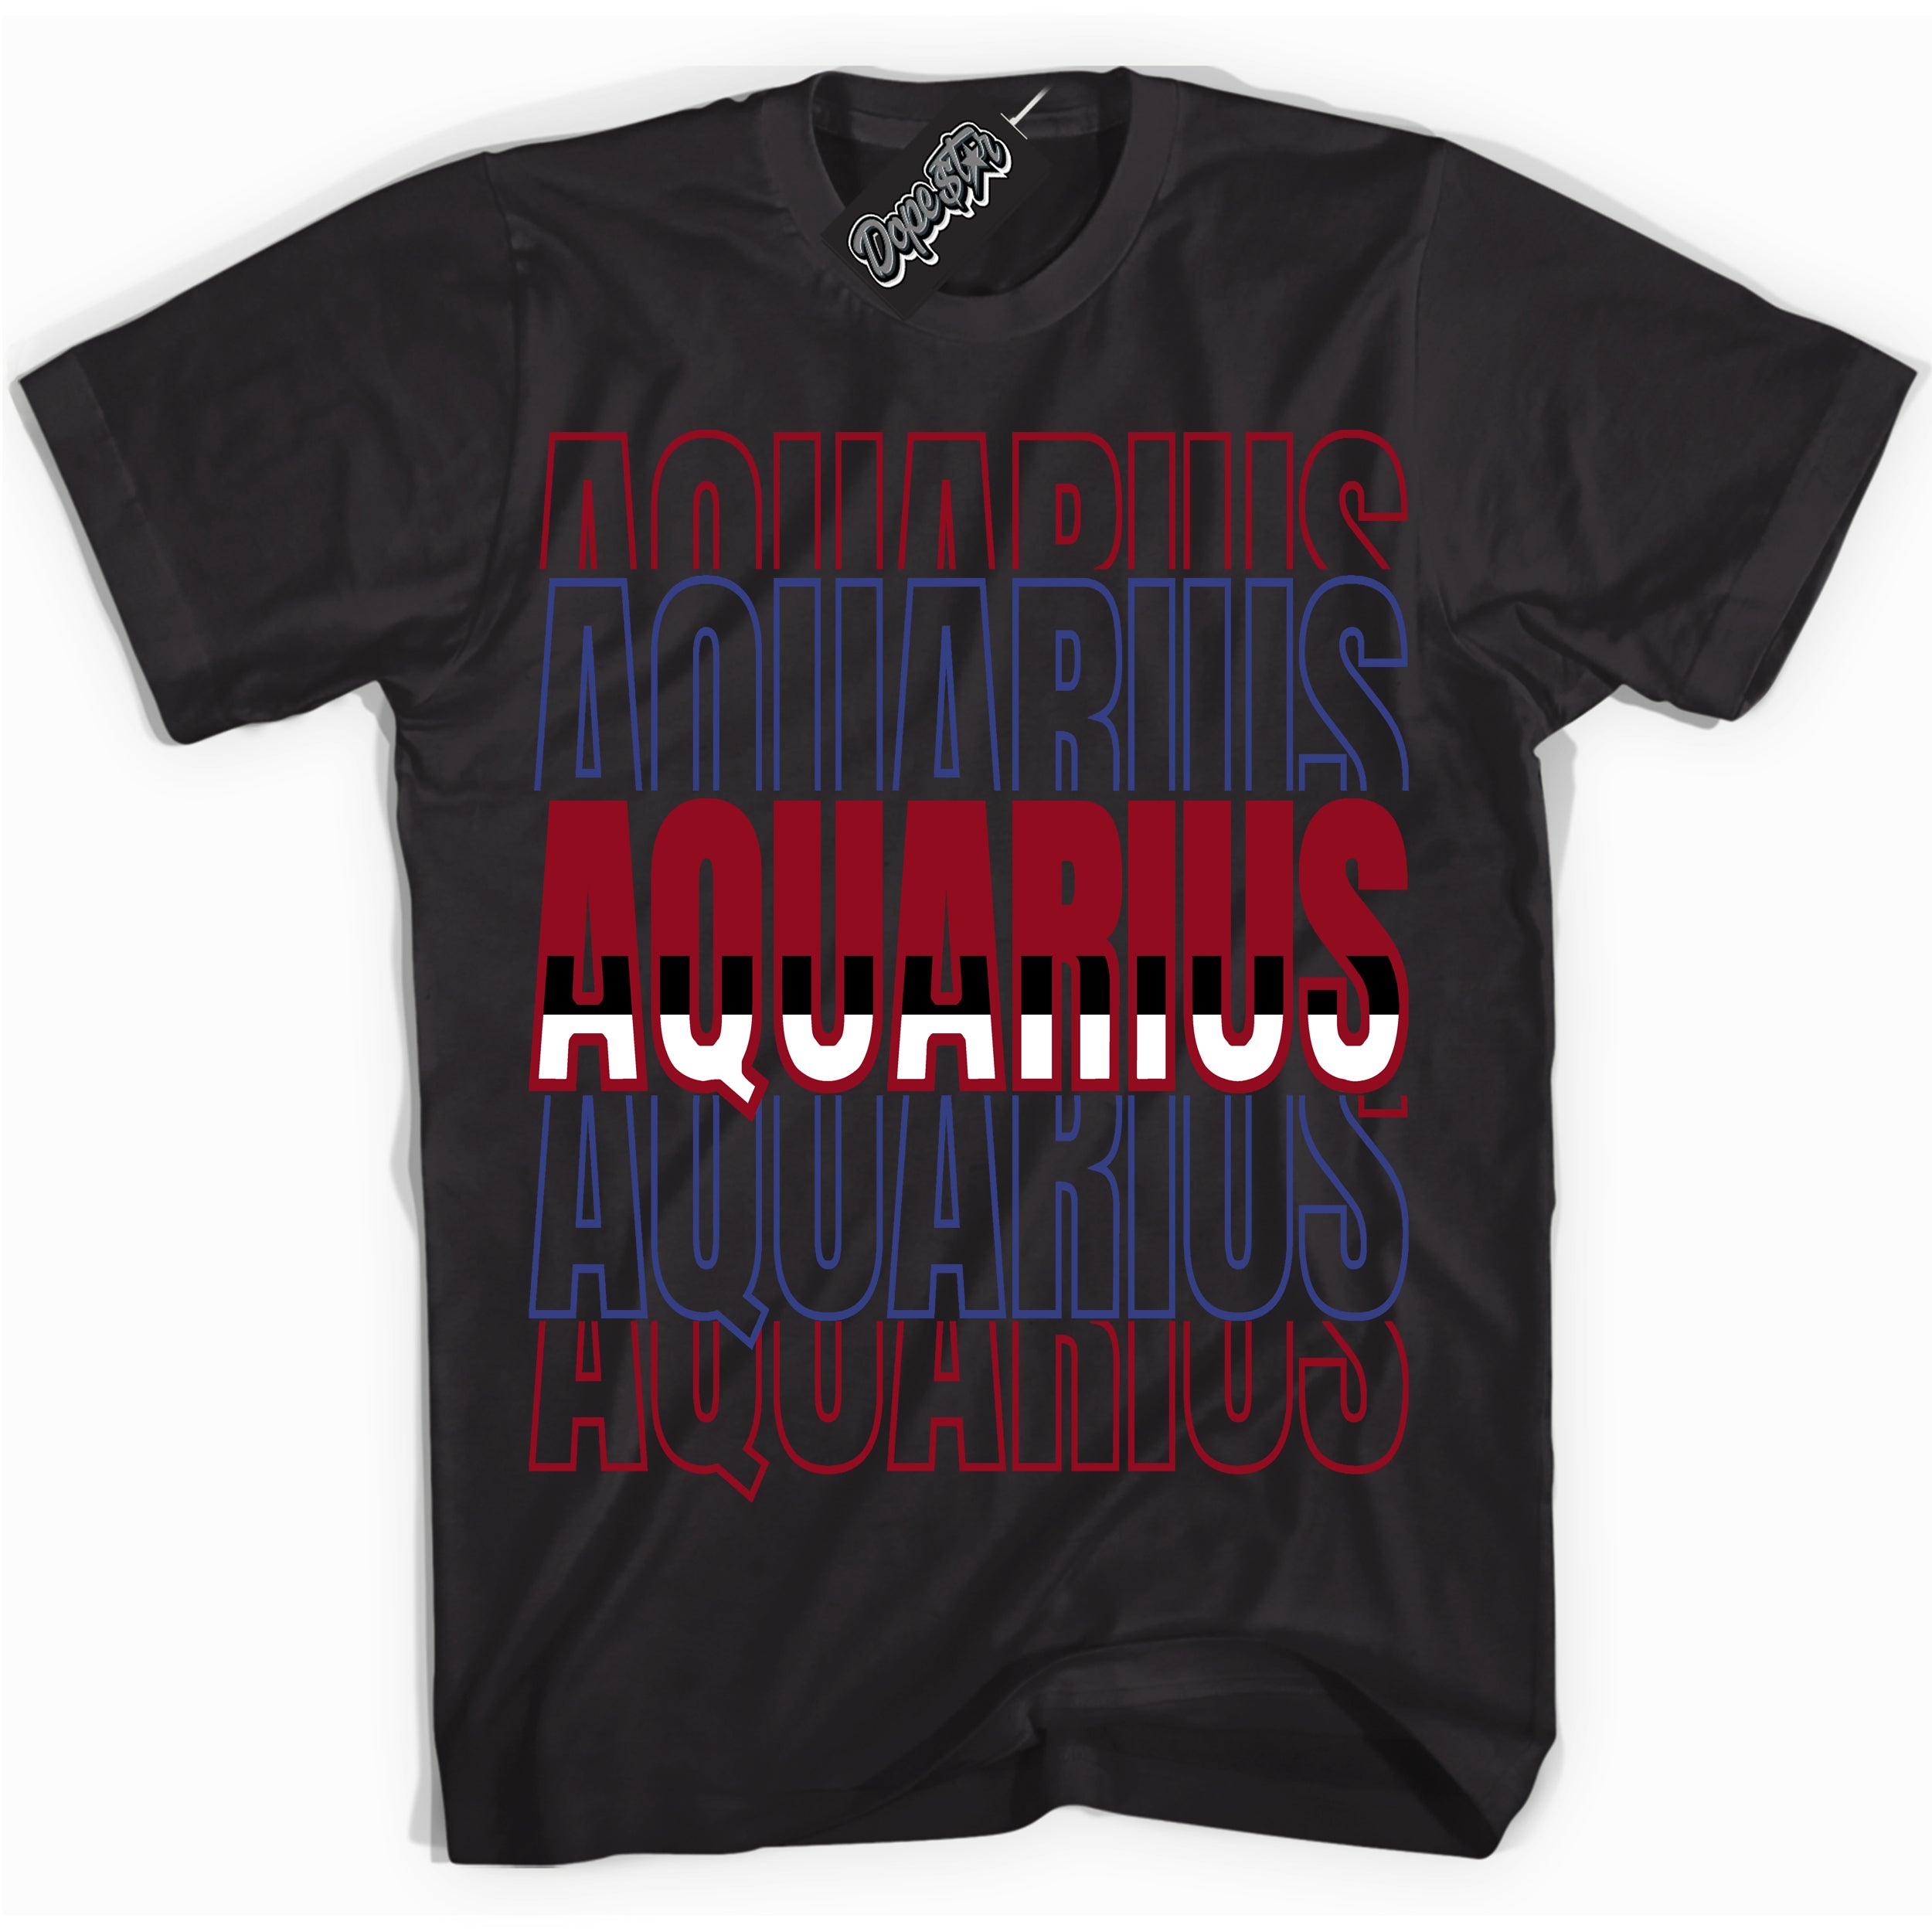 Cool Black Shirt with “ Aquarius ” design that perfectly matches Playoffs 8s Sneakers.